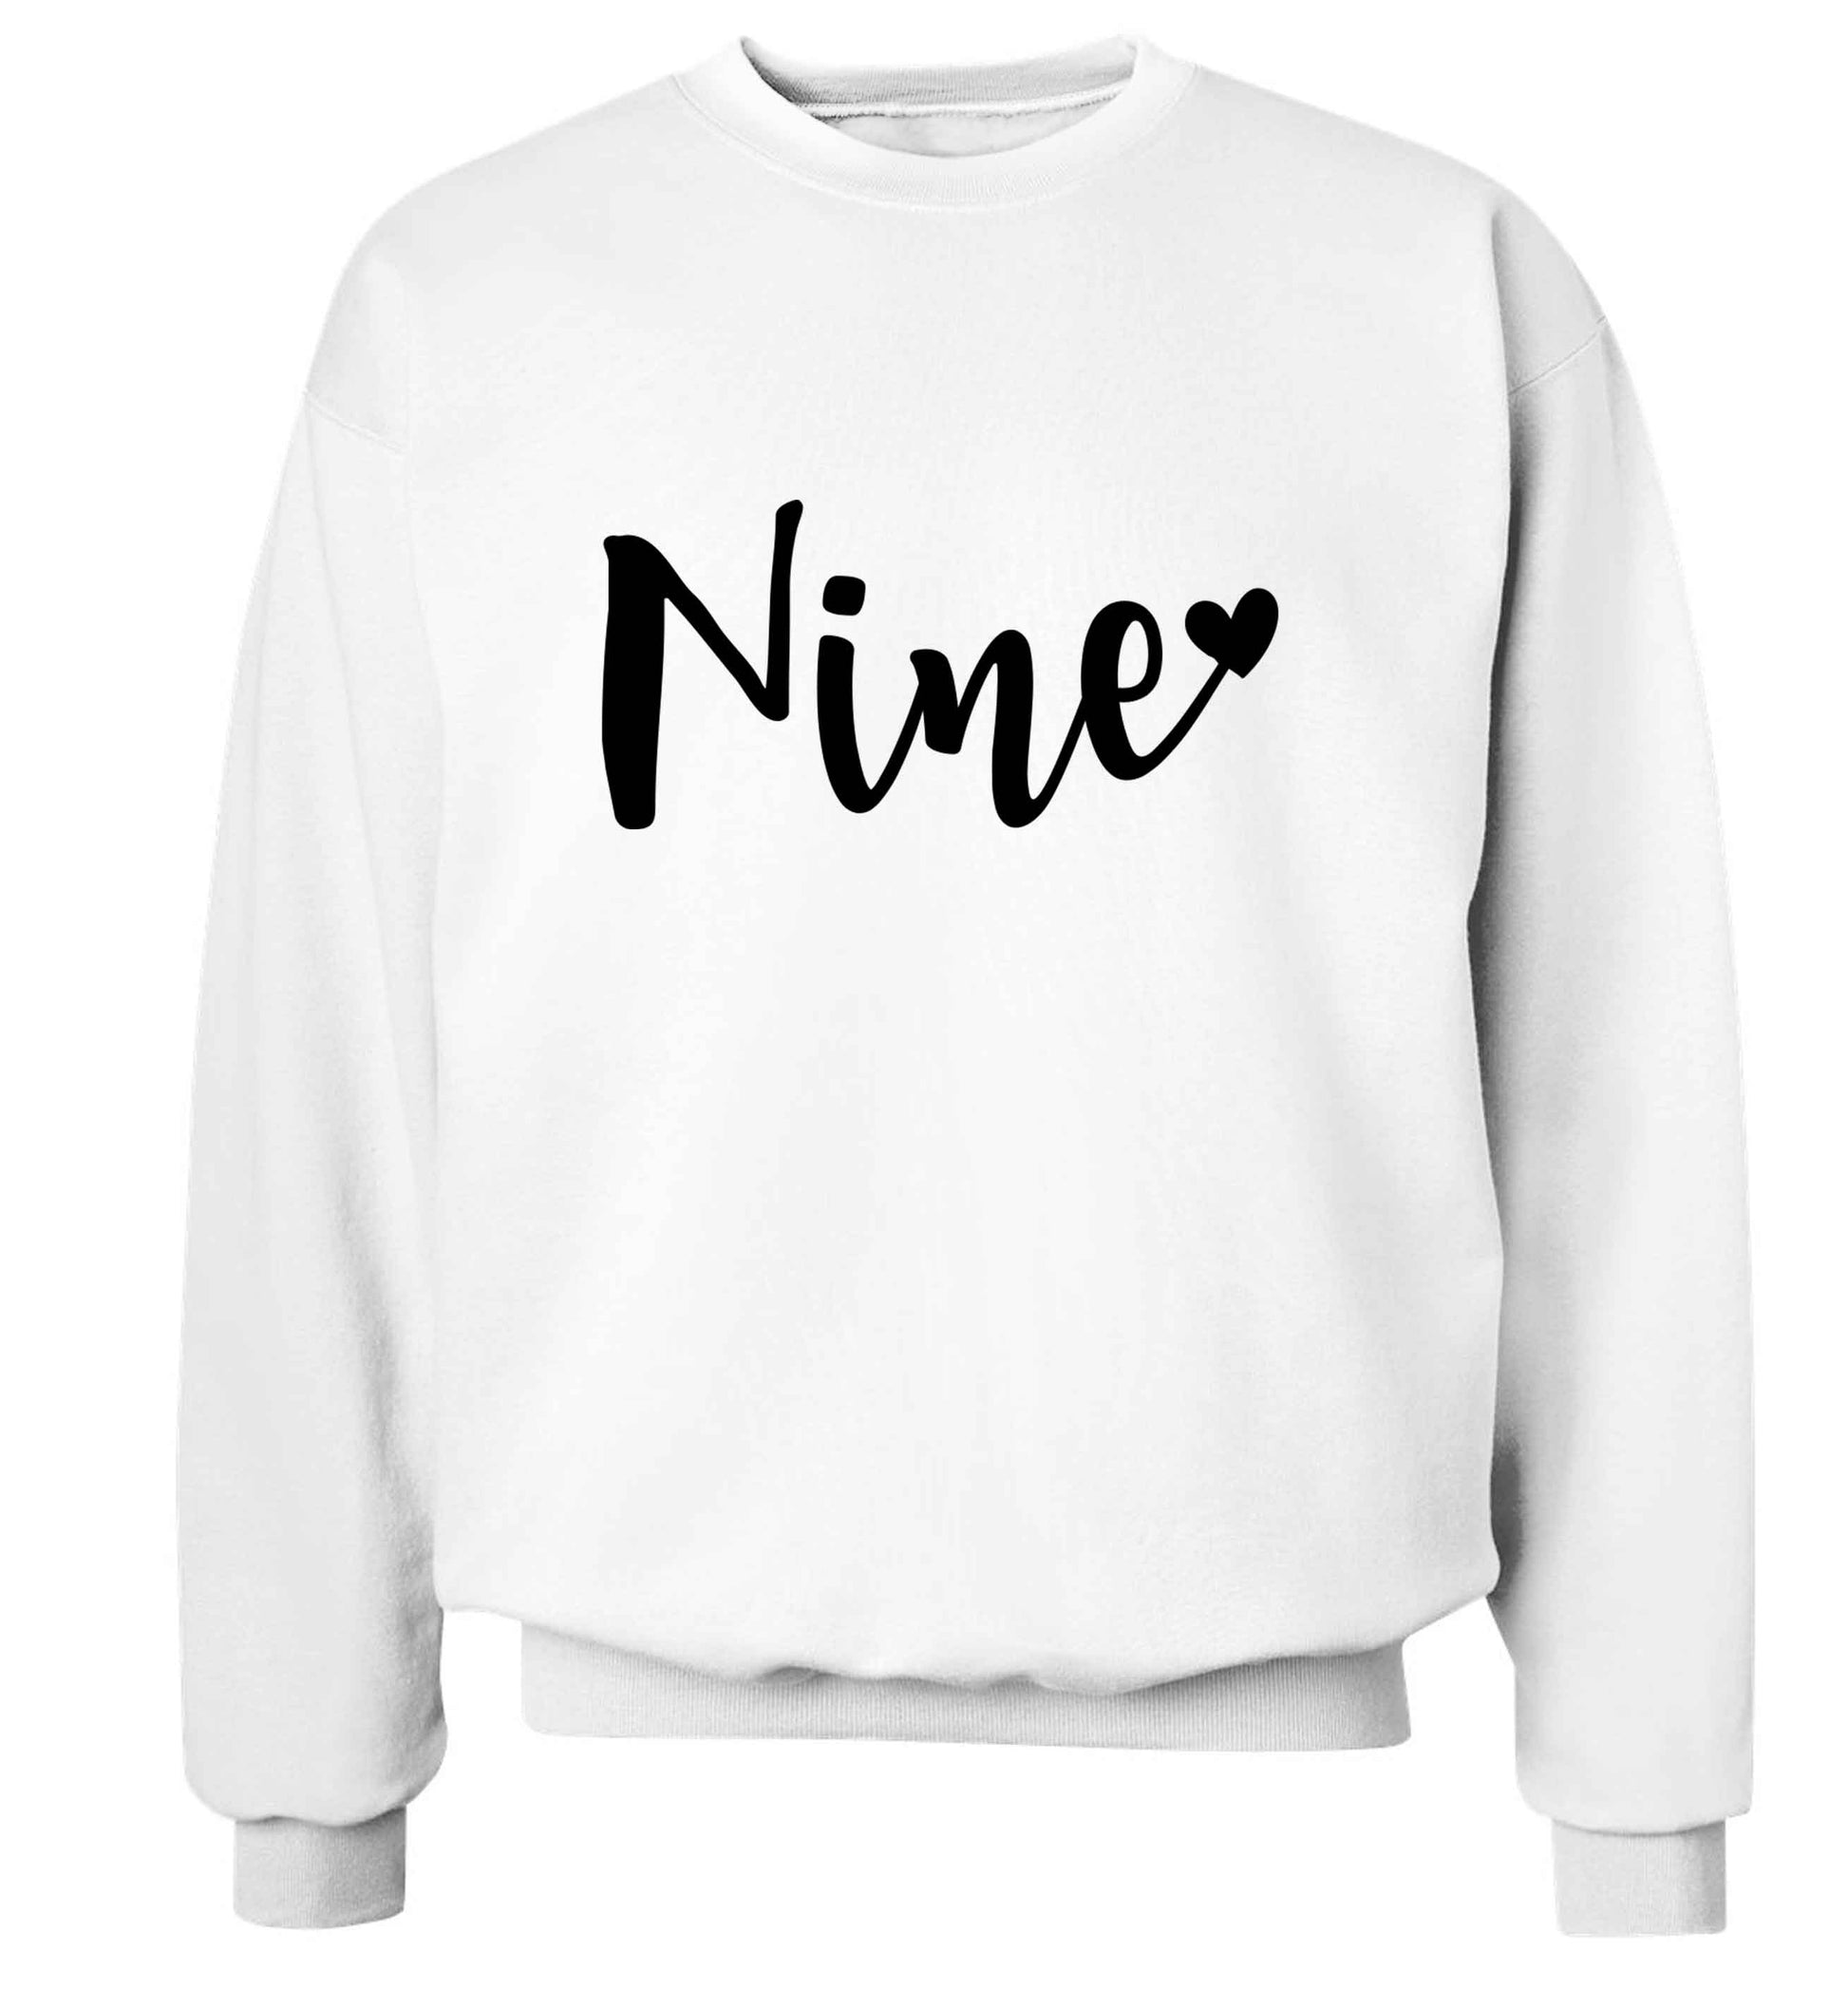 Nine and heart adult's unisex white sweater 2XL